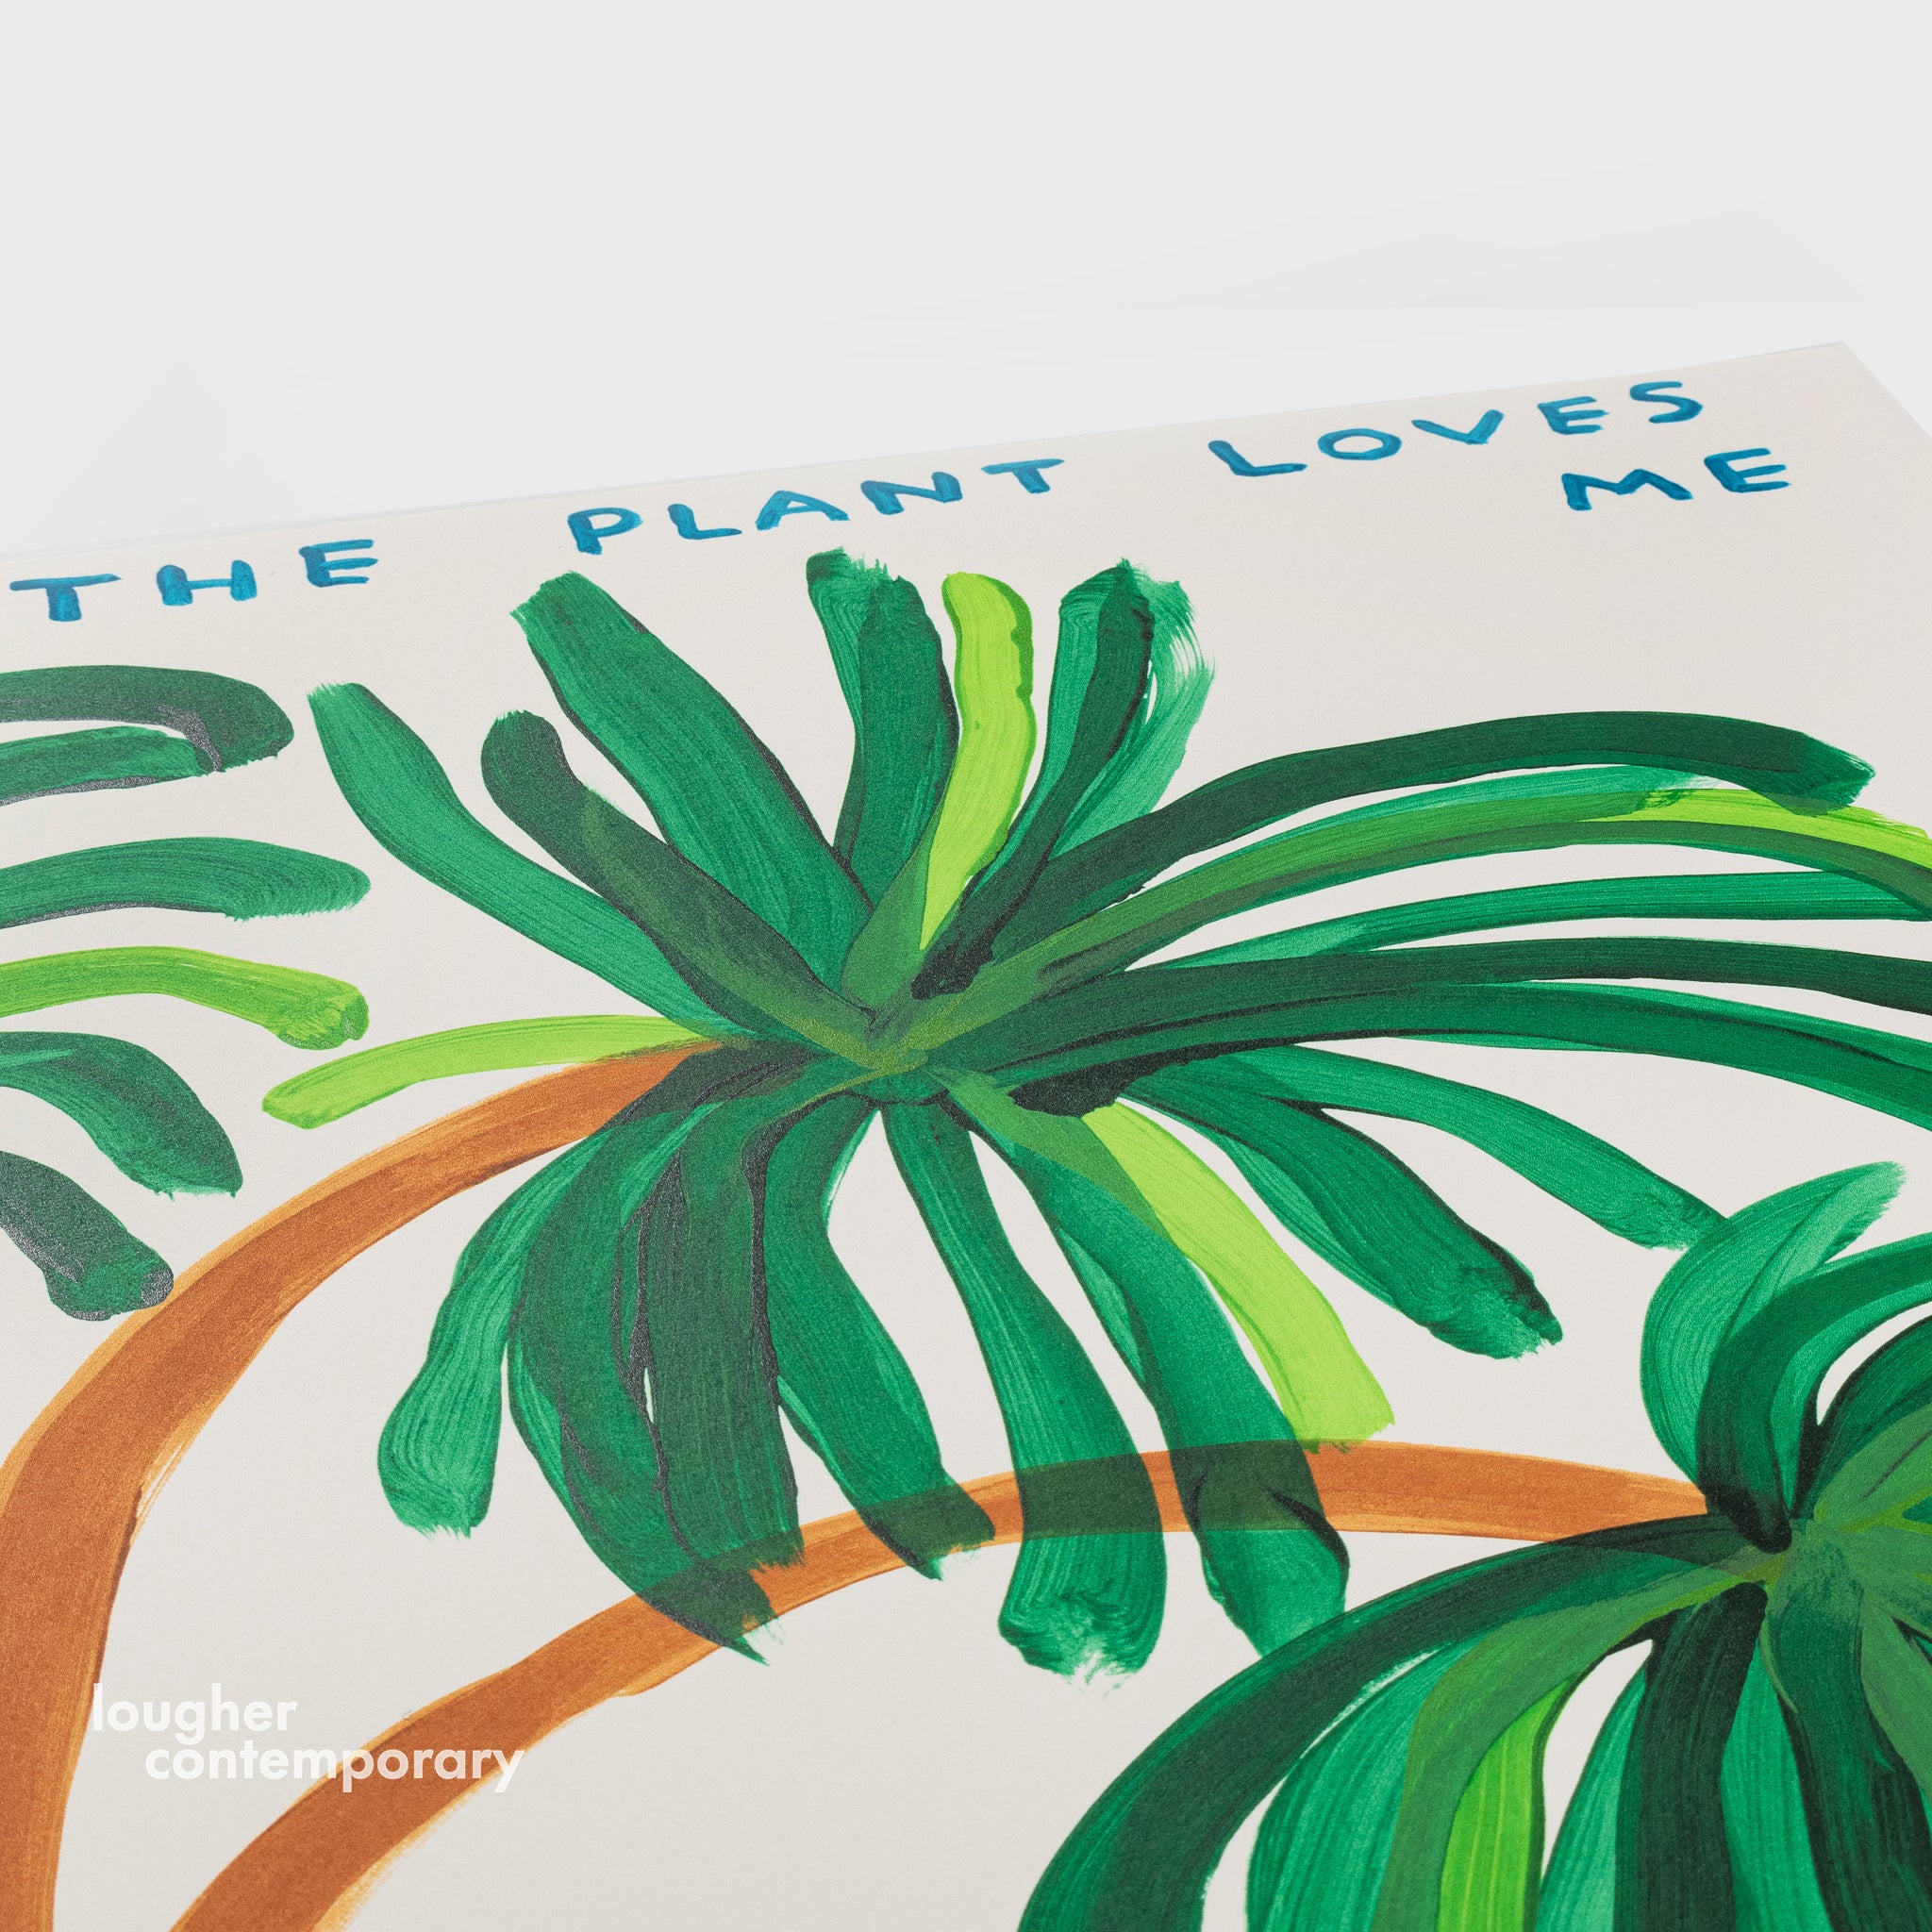 David Shrigley, The Plant Loves Me I Am So Lucky, 2023 For Sale - Lougher Contemporary